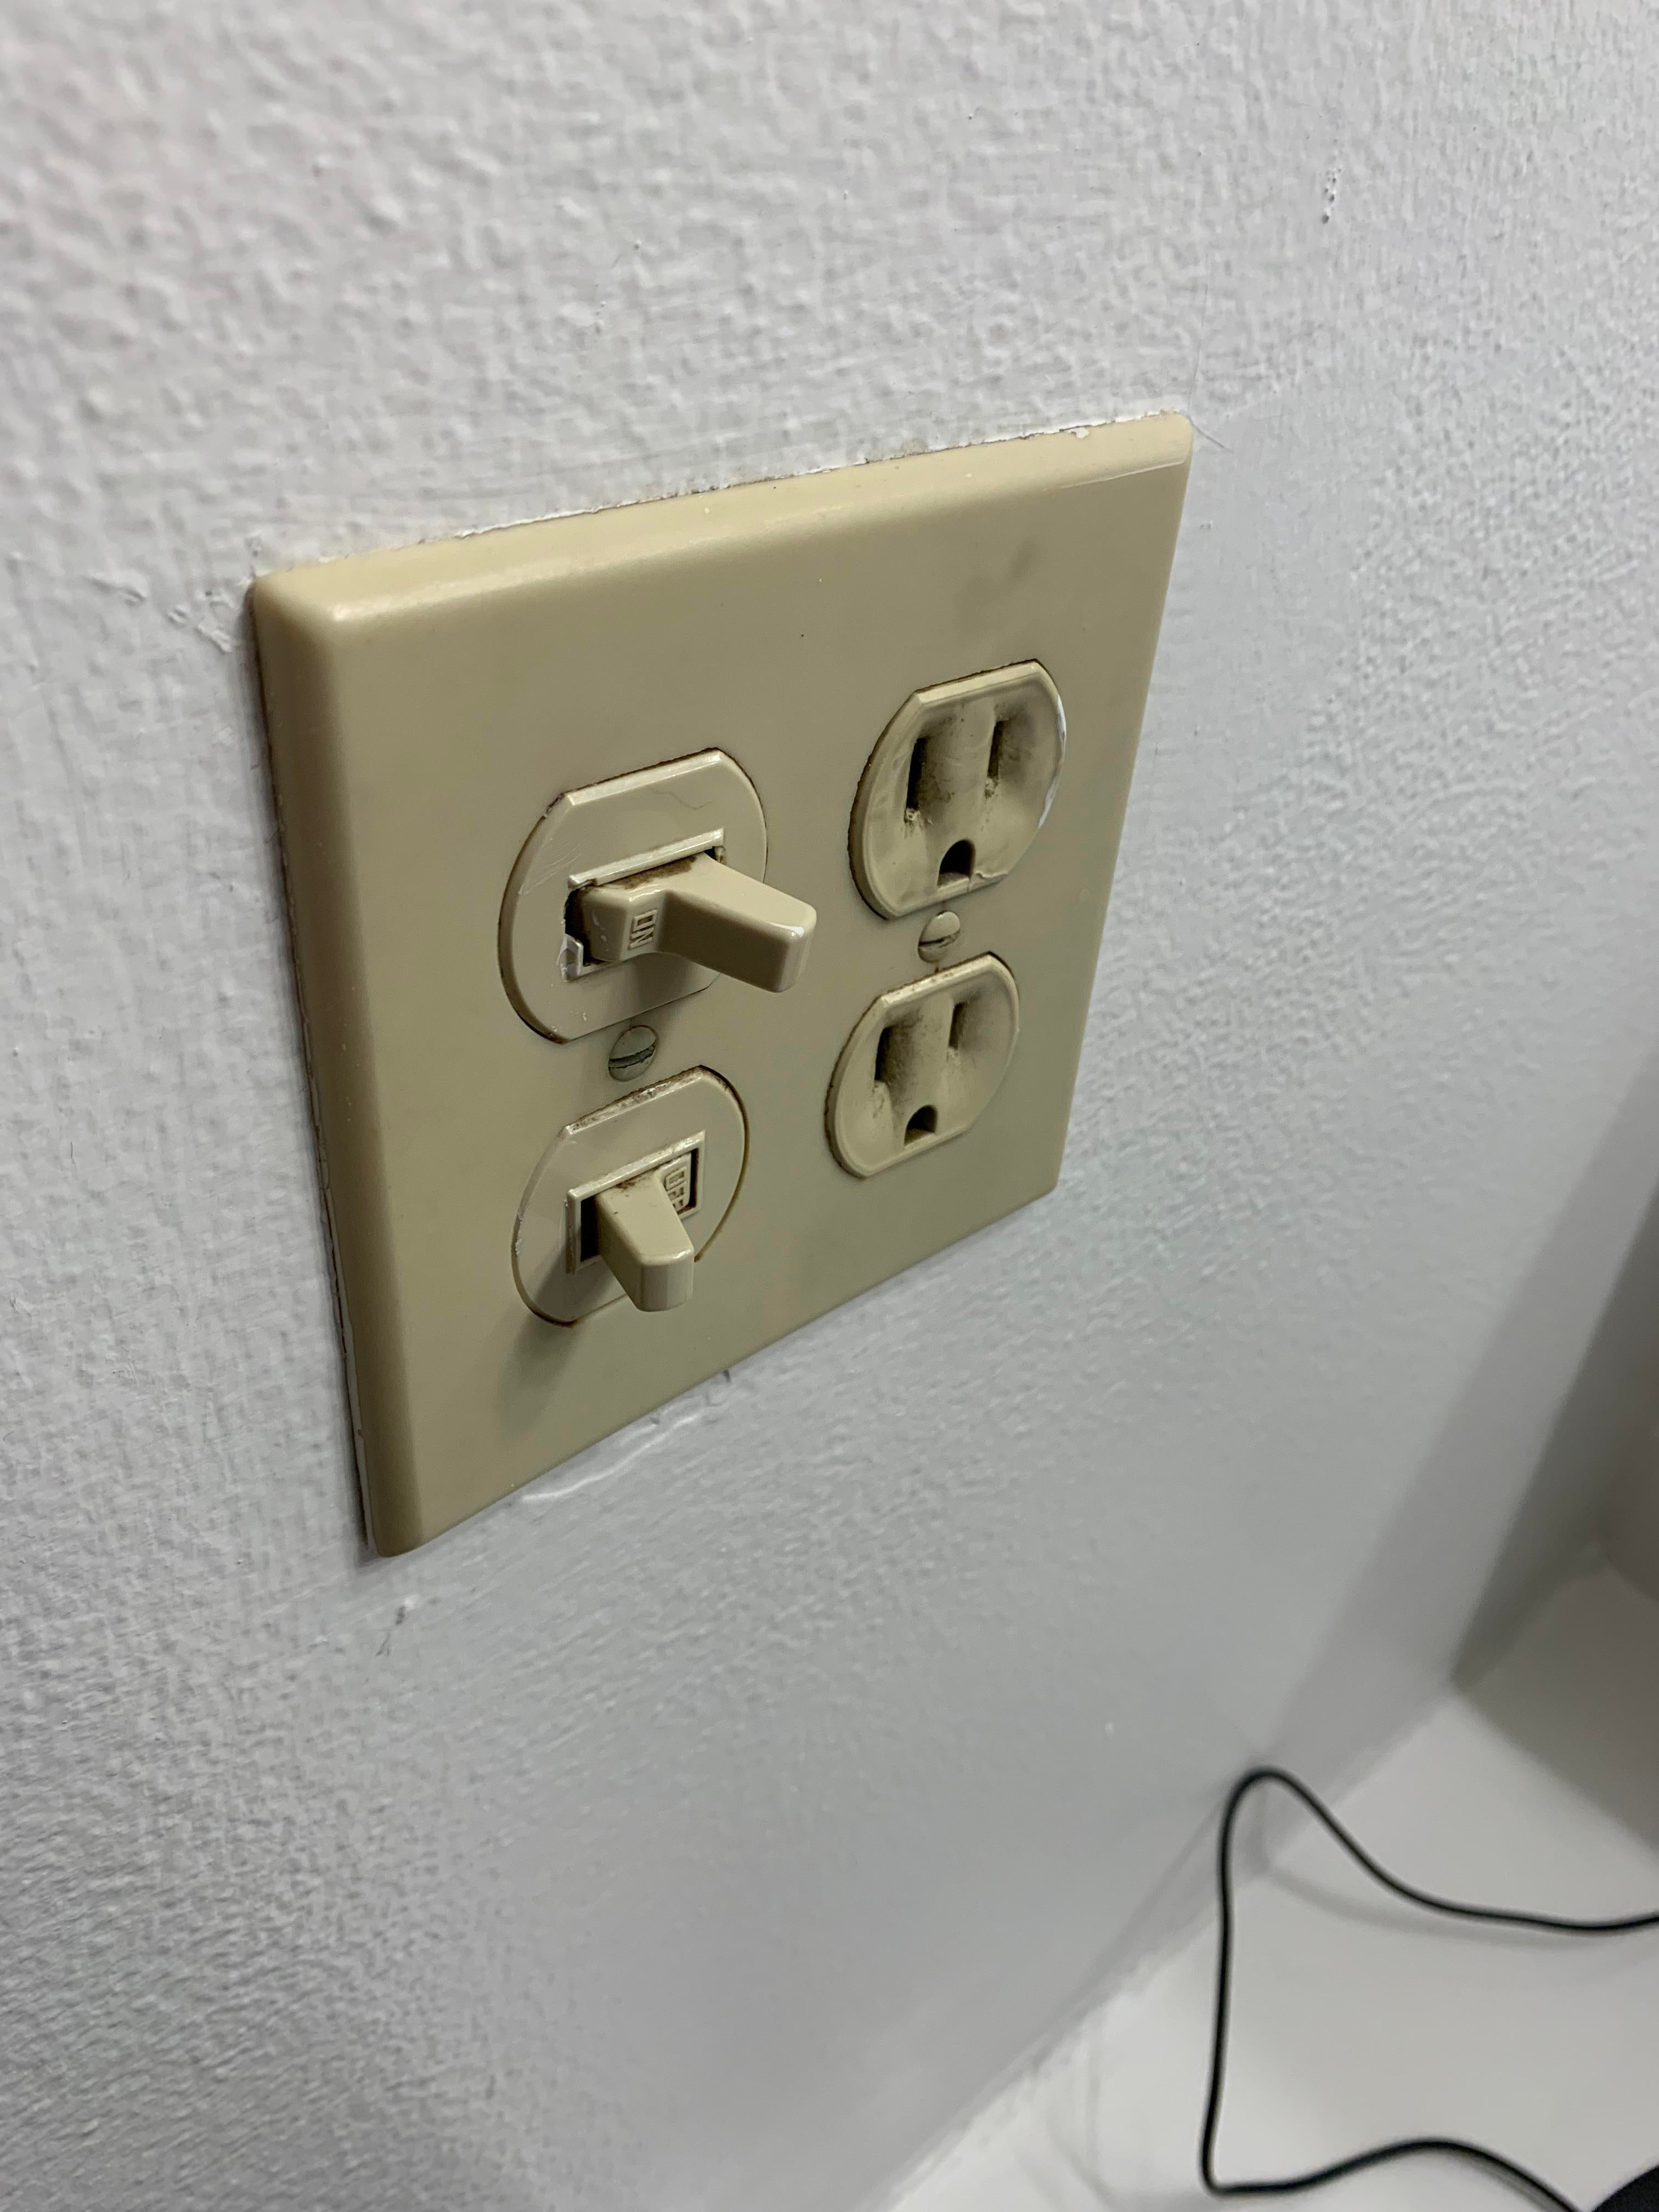 Does anyone know of a HomeKit or HomeBridge compatible switch